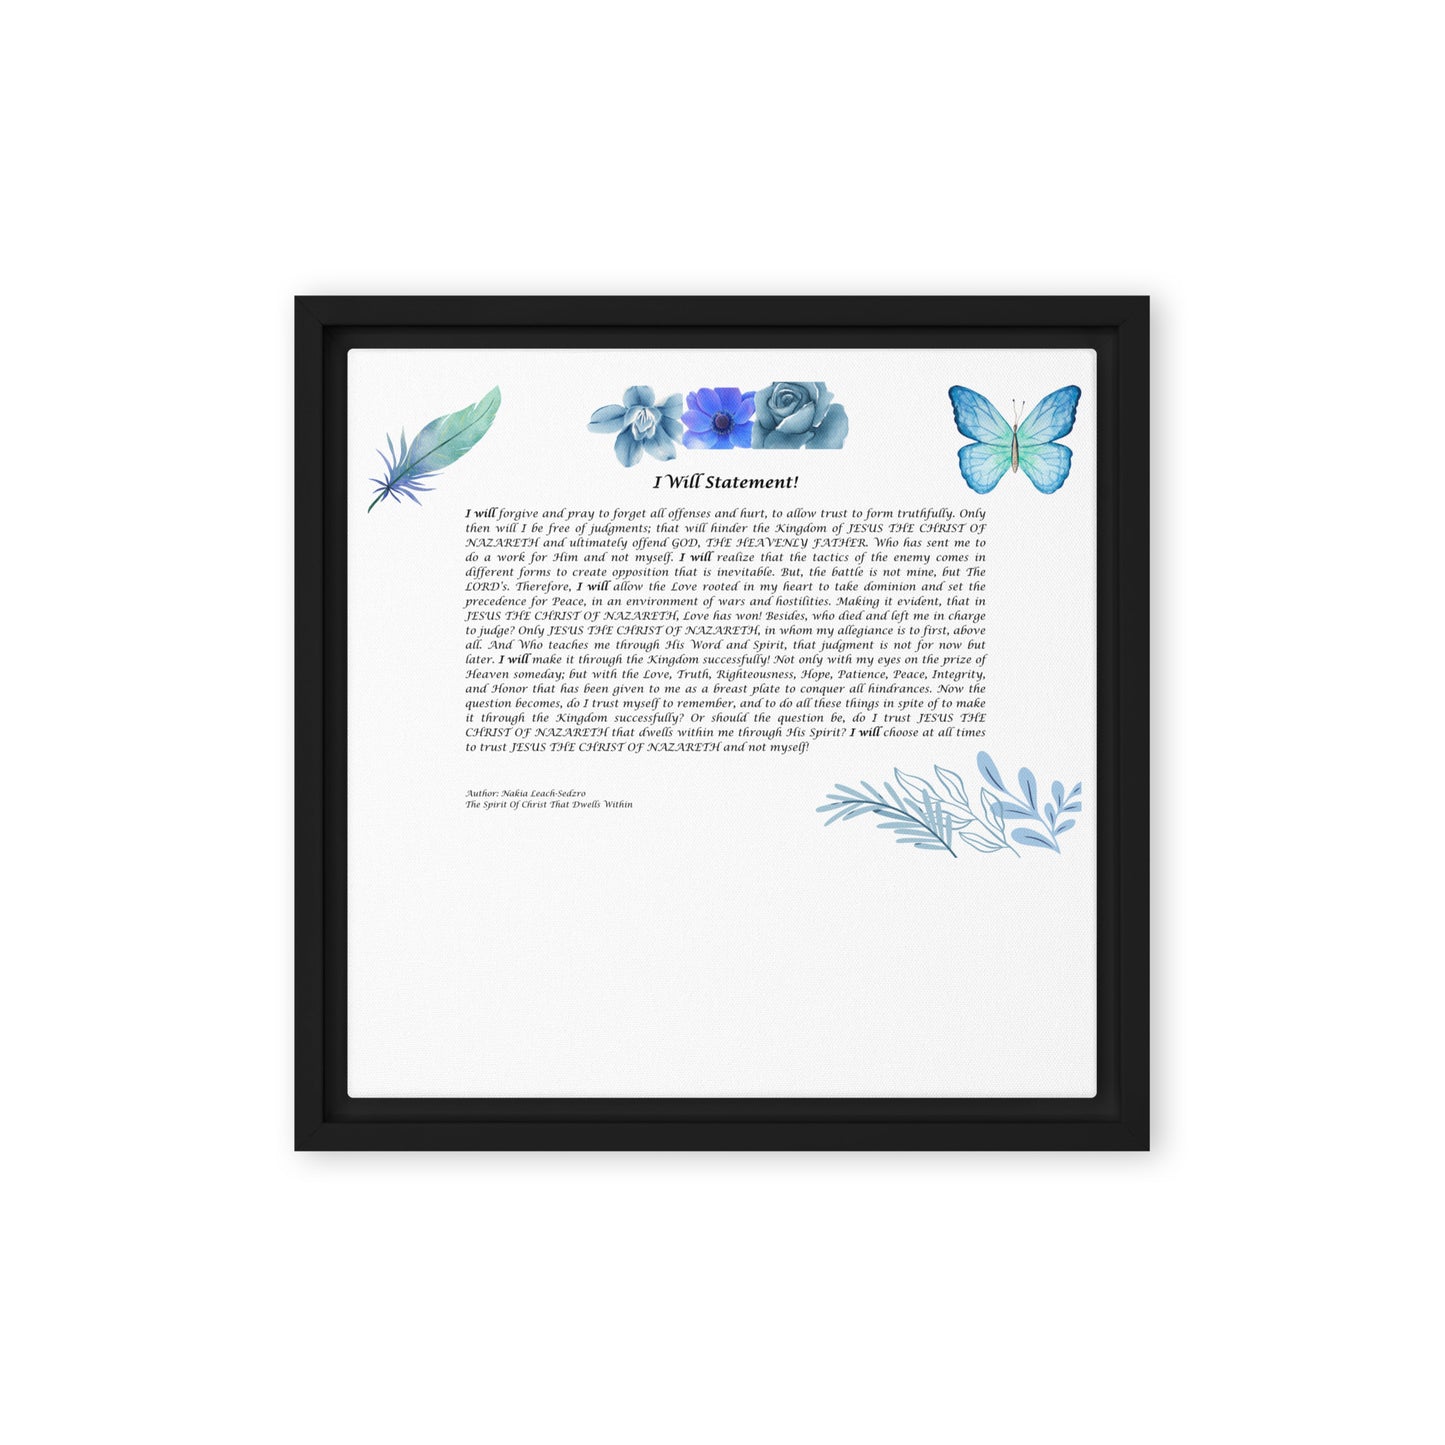 By Faith I Will Statement Framed Canvas